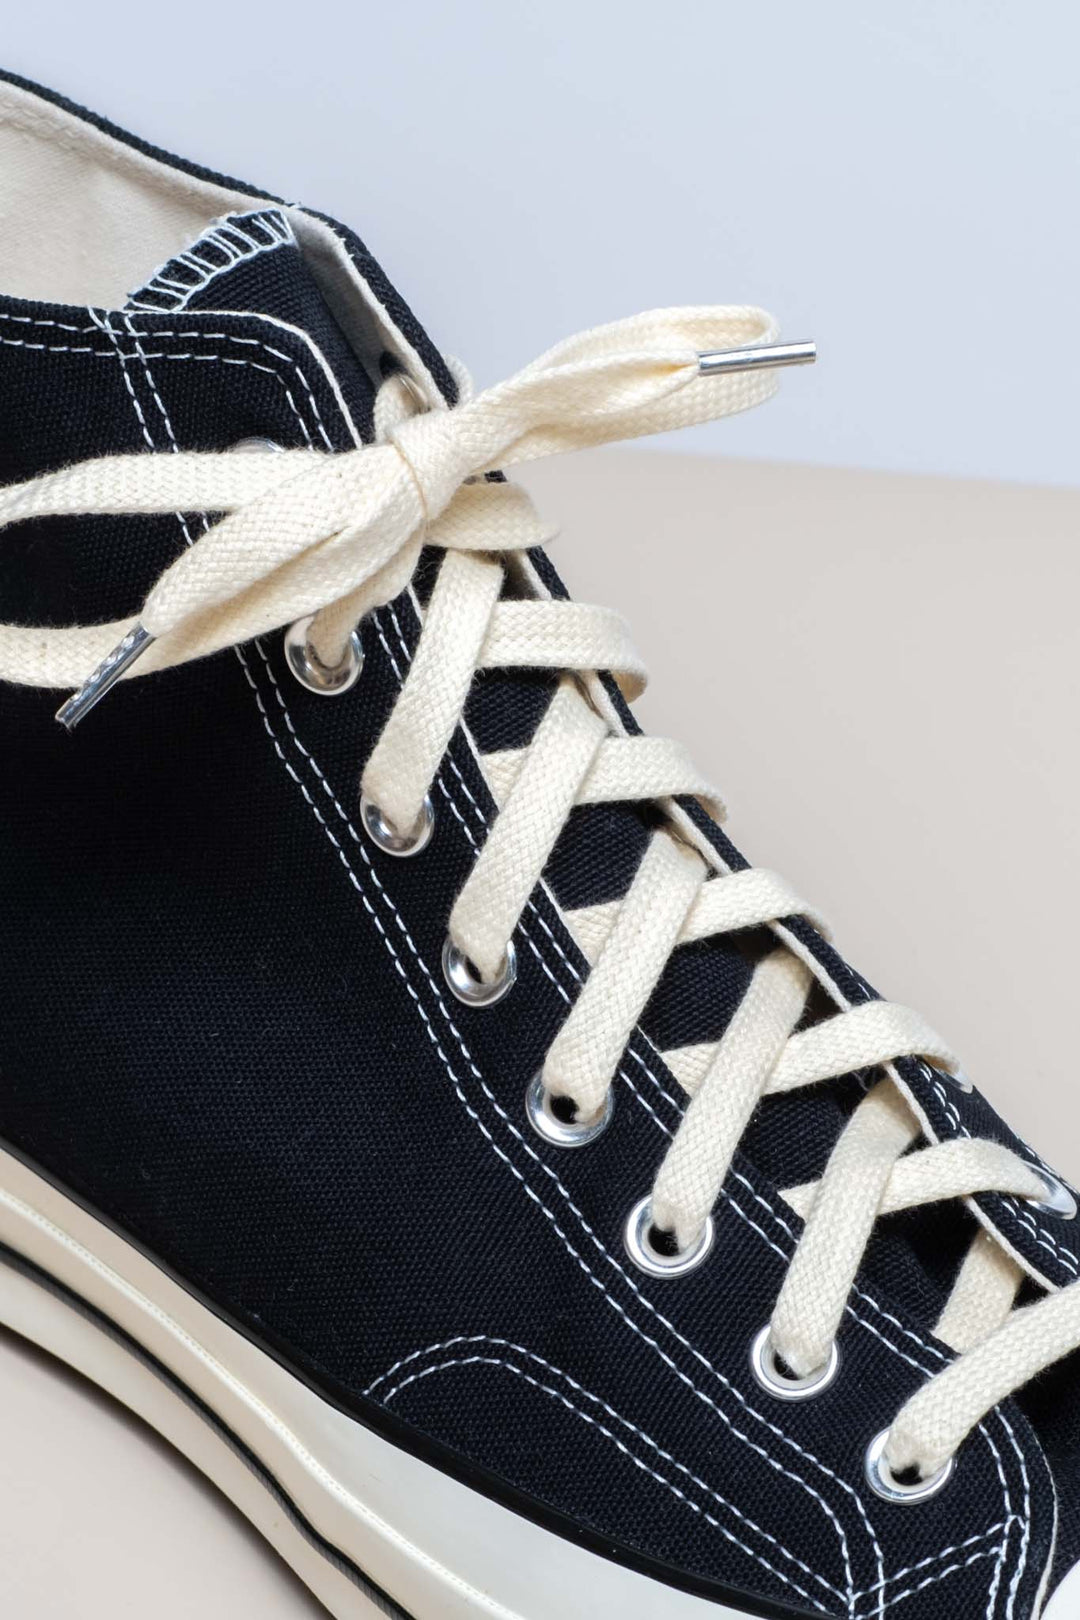 How to find the right length for shoelaces